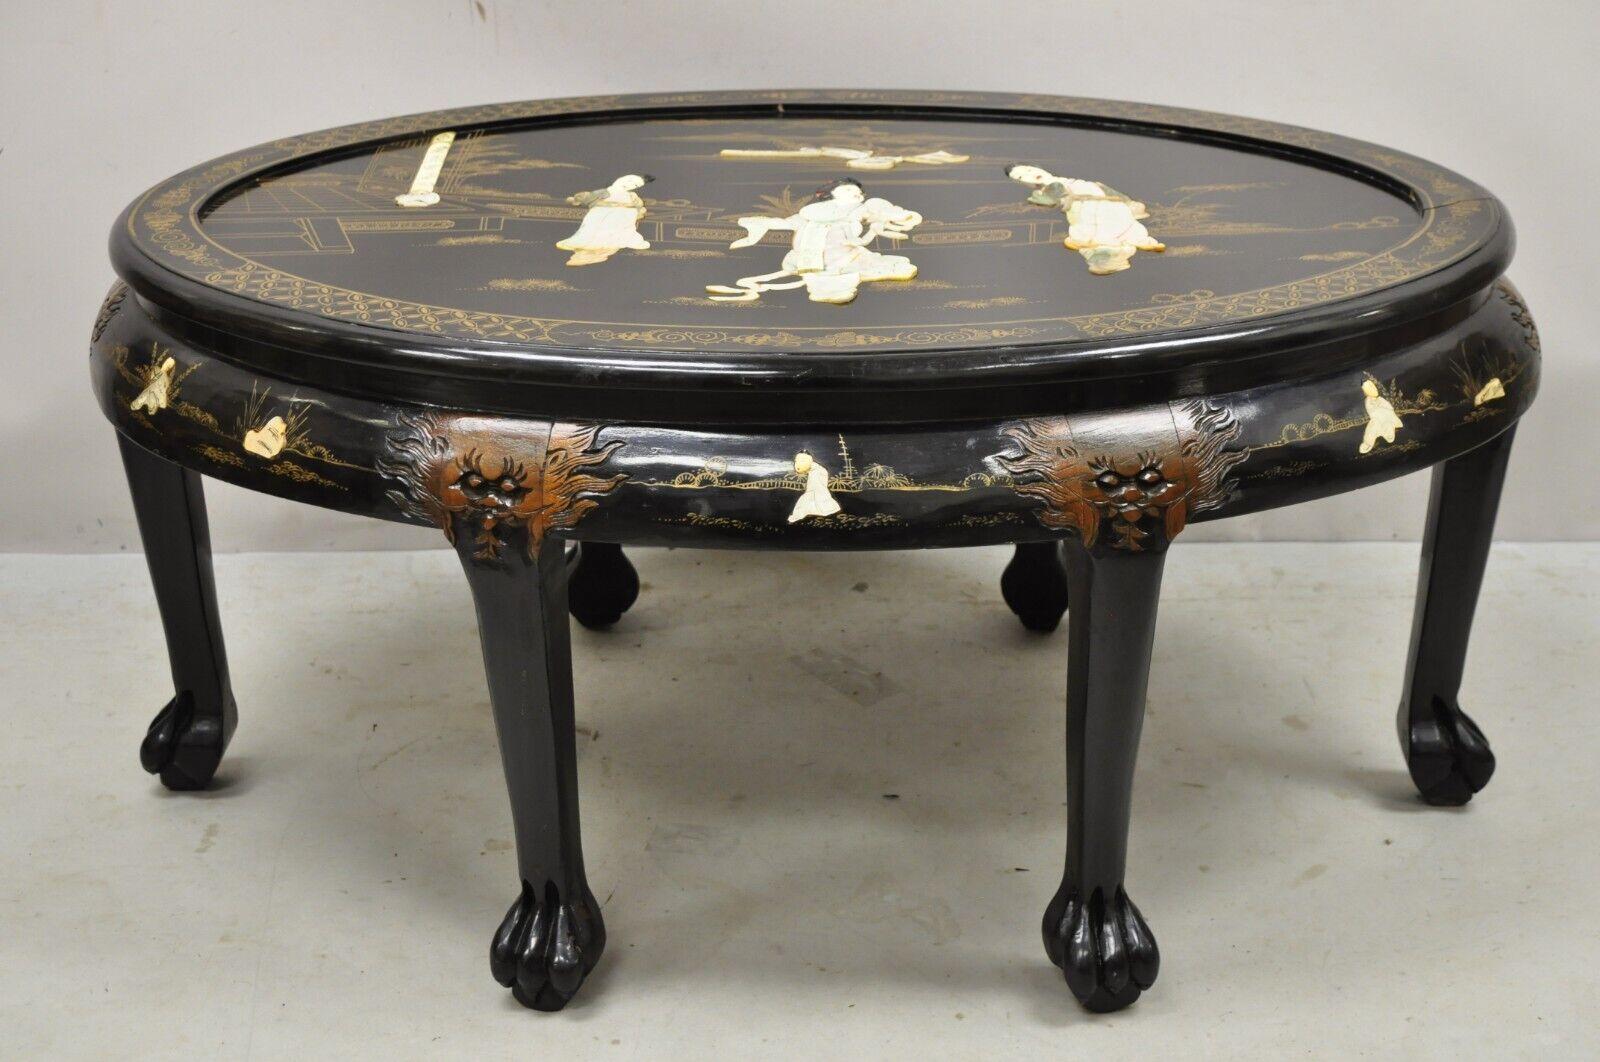 Vintage Chinese Black Lacquer Mother of Pearl Oval Nesting Coffee Table Set - 6 Stools - A. Item features a custom oval glass top, black lacquer finish, mother of pearl figural inlay throughout, very nice vintage set, great style and form, listing